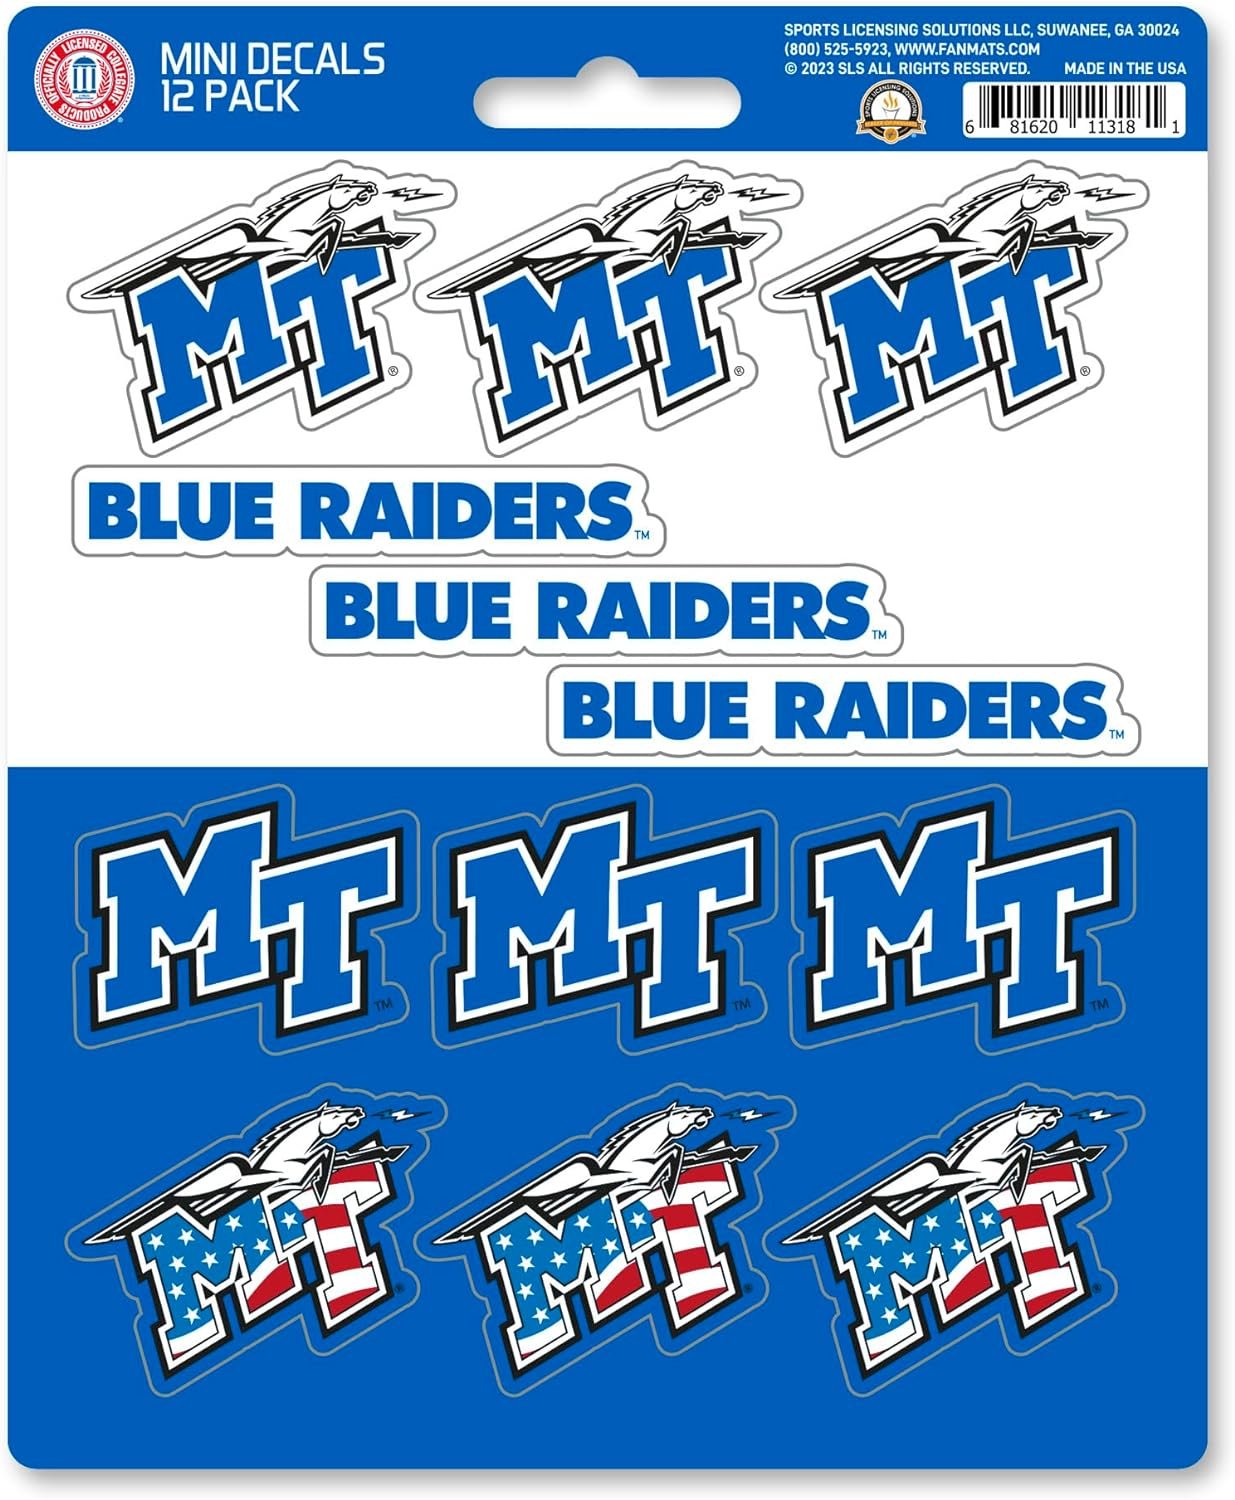 Middle Tennessee State University Blue Raiders 12-Piece Mini Decal Sticker Set, 5x6 Inch Sheet, Gift for football fans for any hard surfaces around home, automotive, personal items